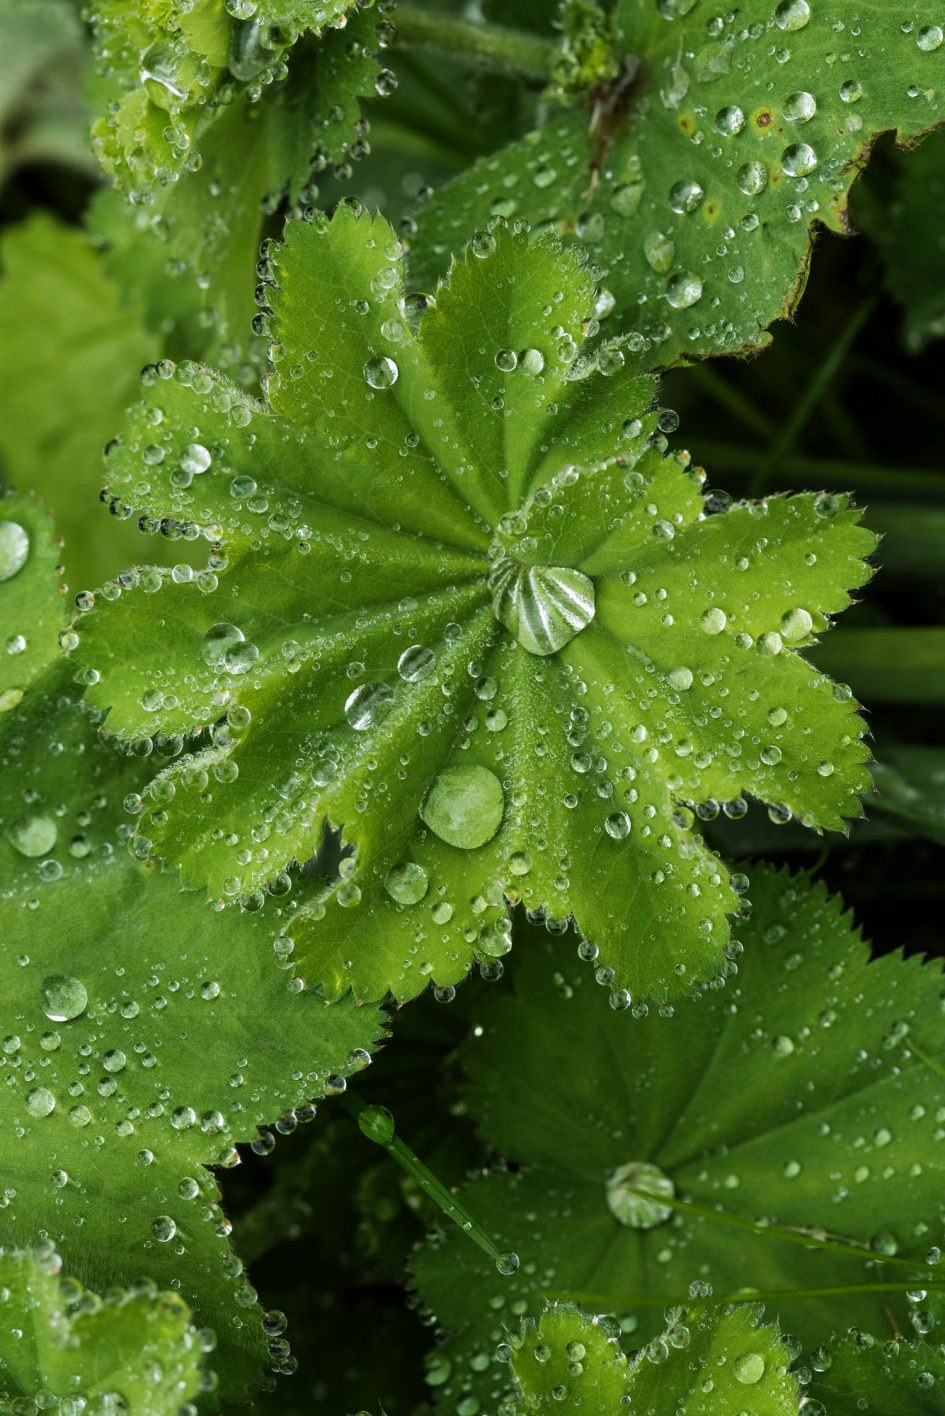 Rain collects in the lush green leaves of Lady Mantle ( Alchemilla Mollis ) after a Summer shower.